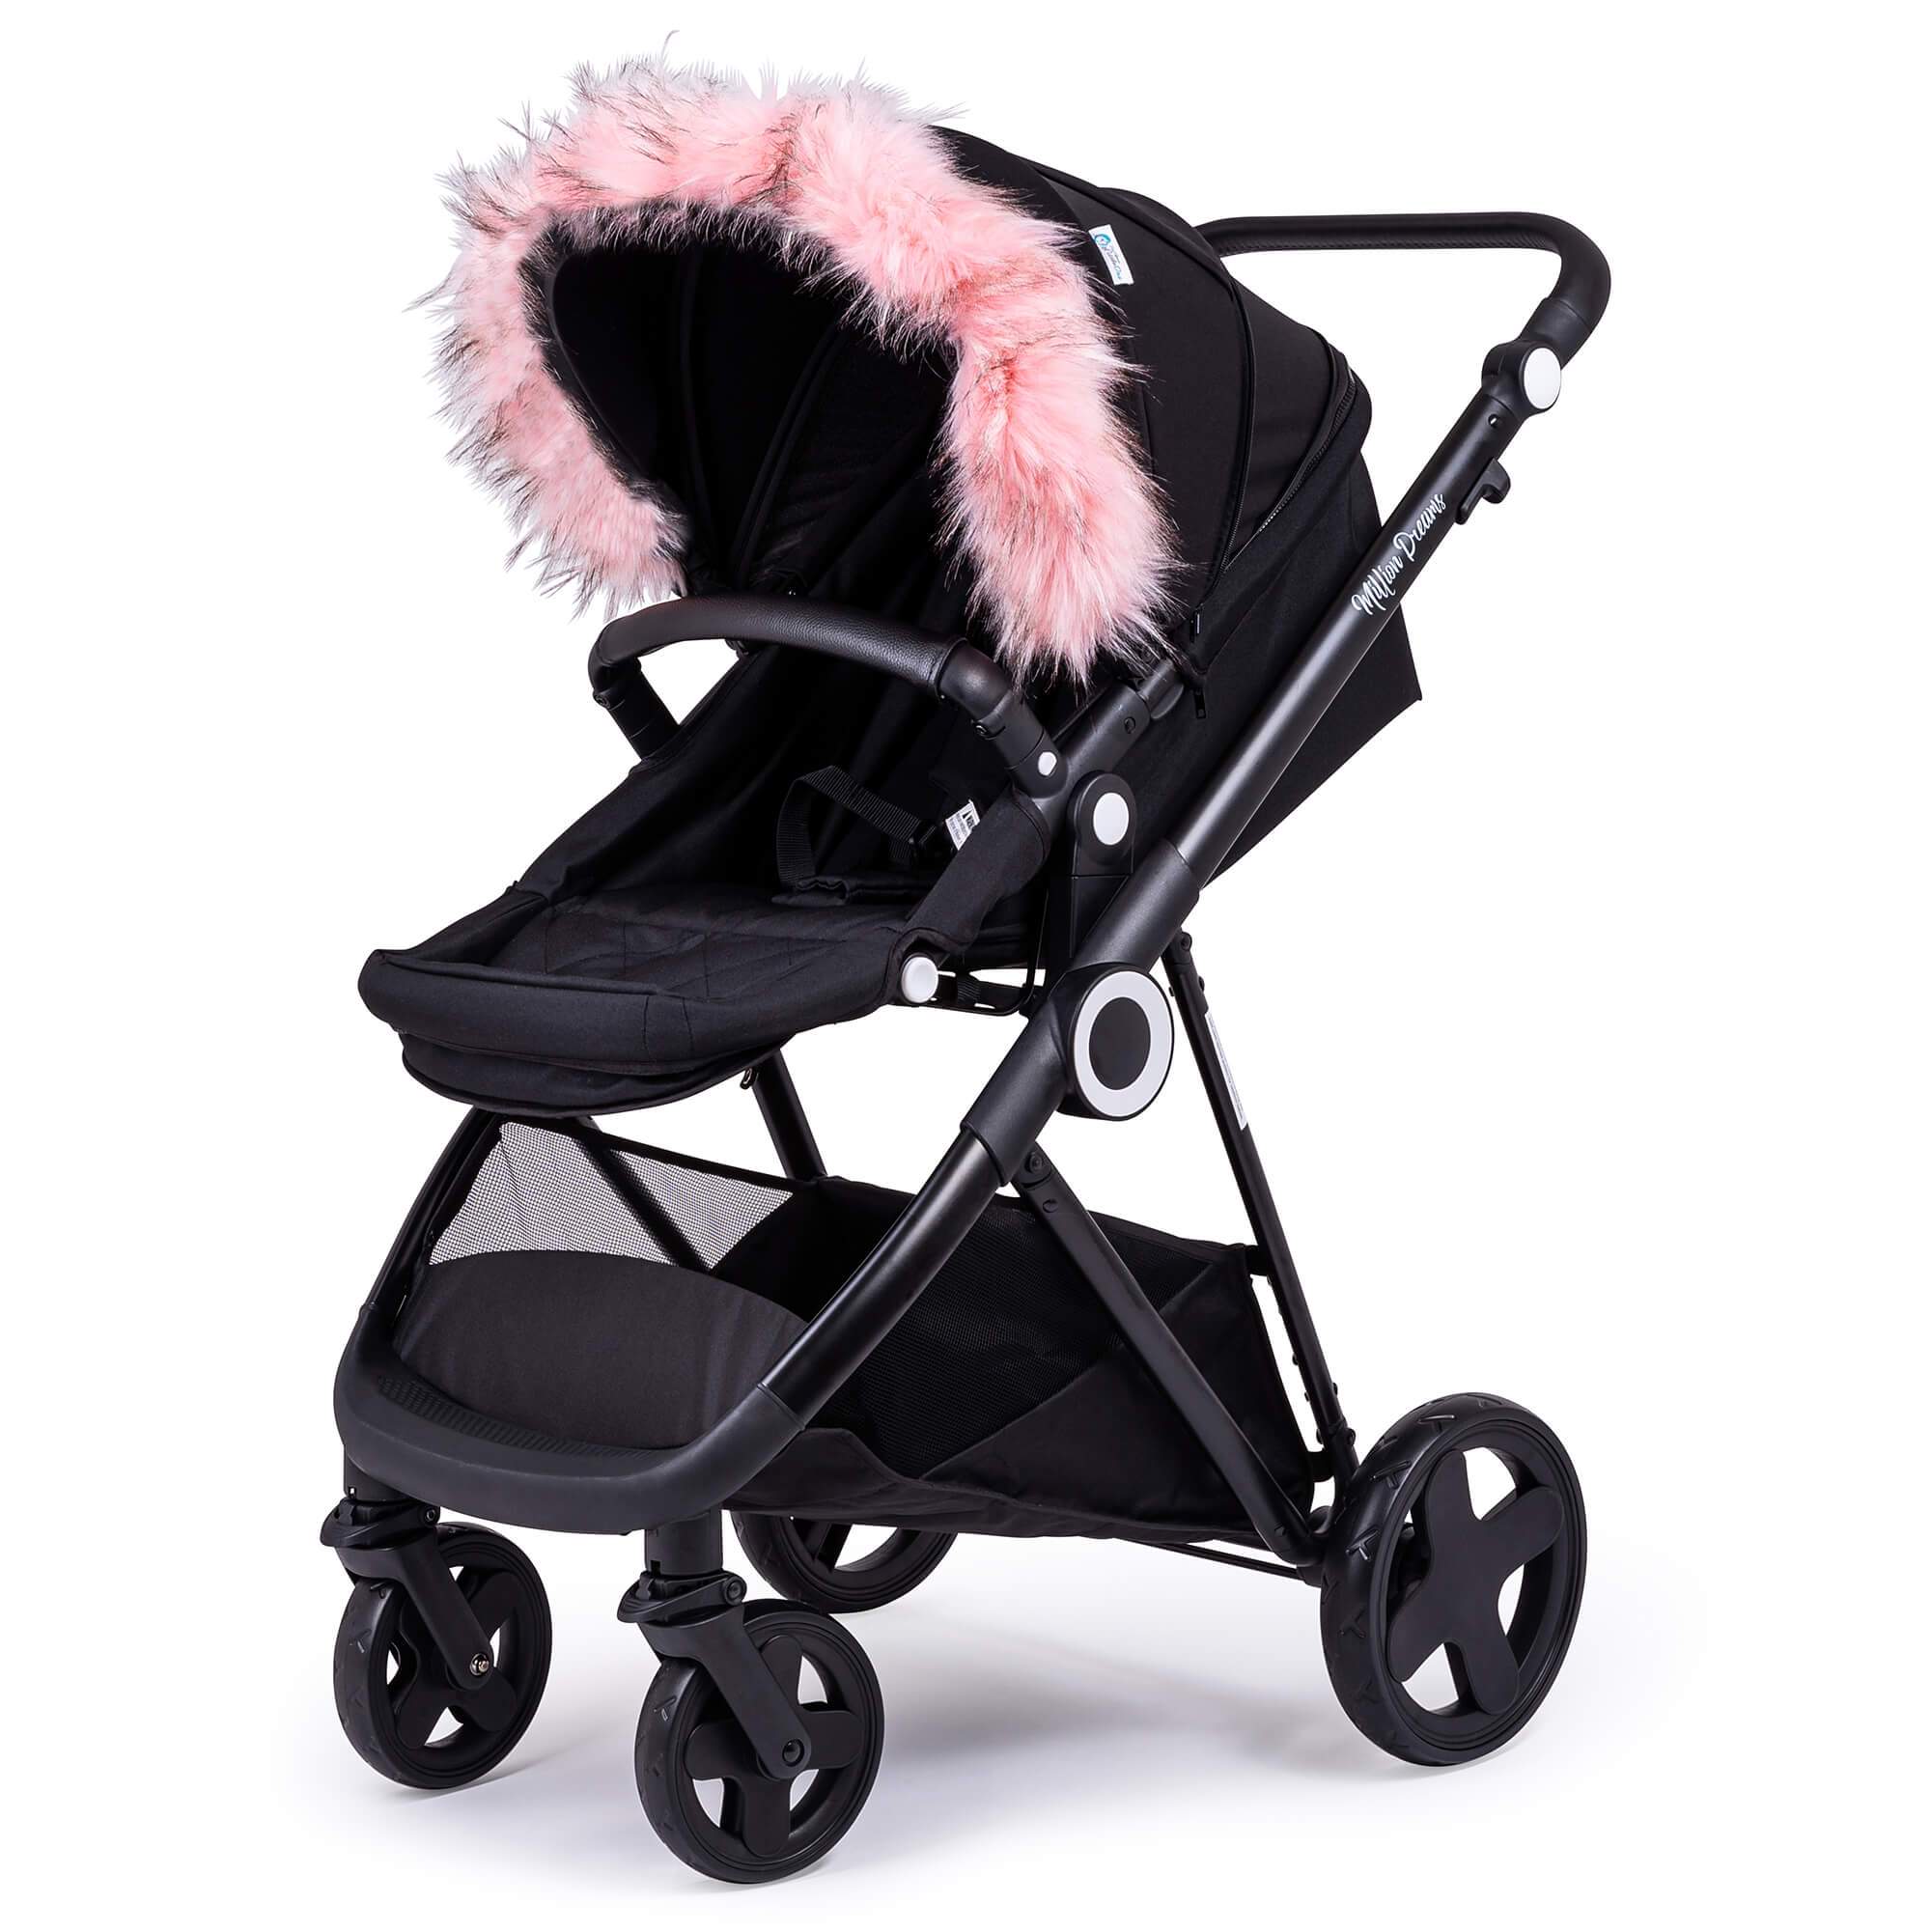 Pram Fur Hood Trim Attachment for Pushchair Compatible with Cosatto - For Your Little One